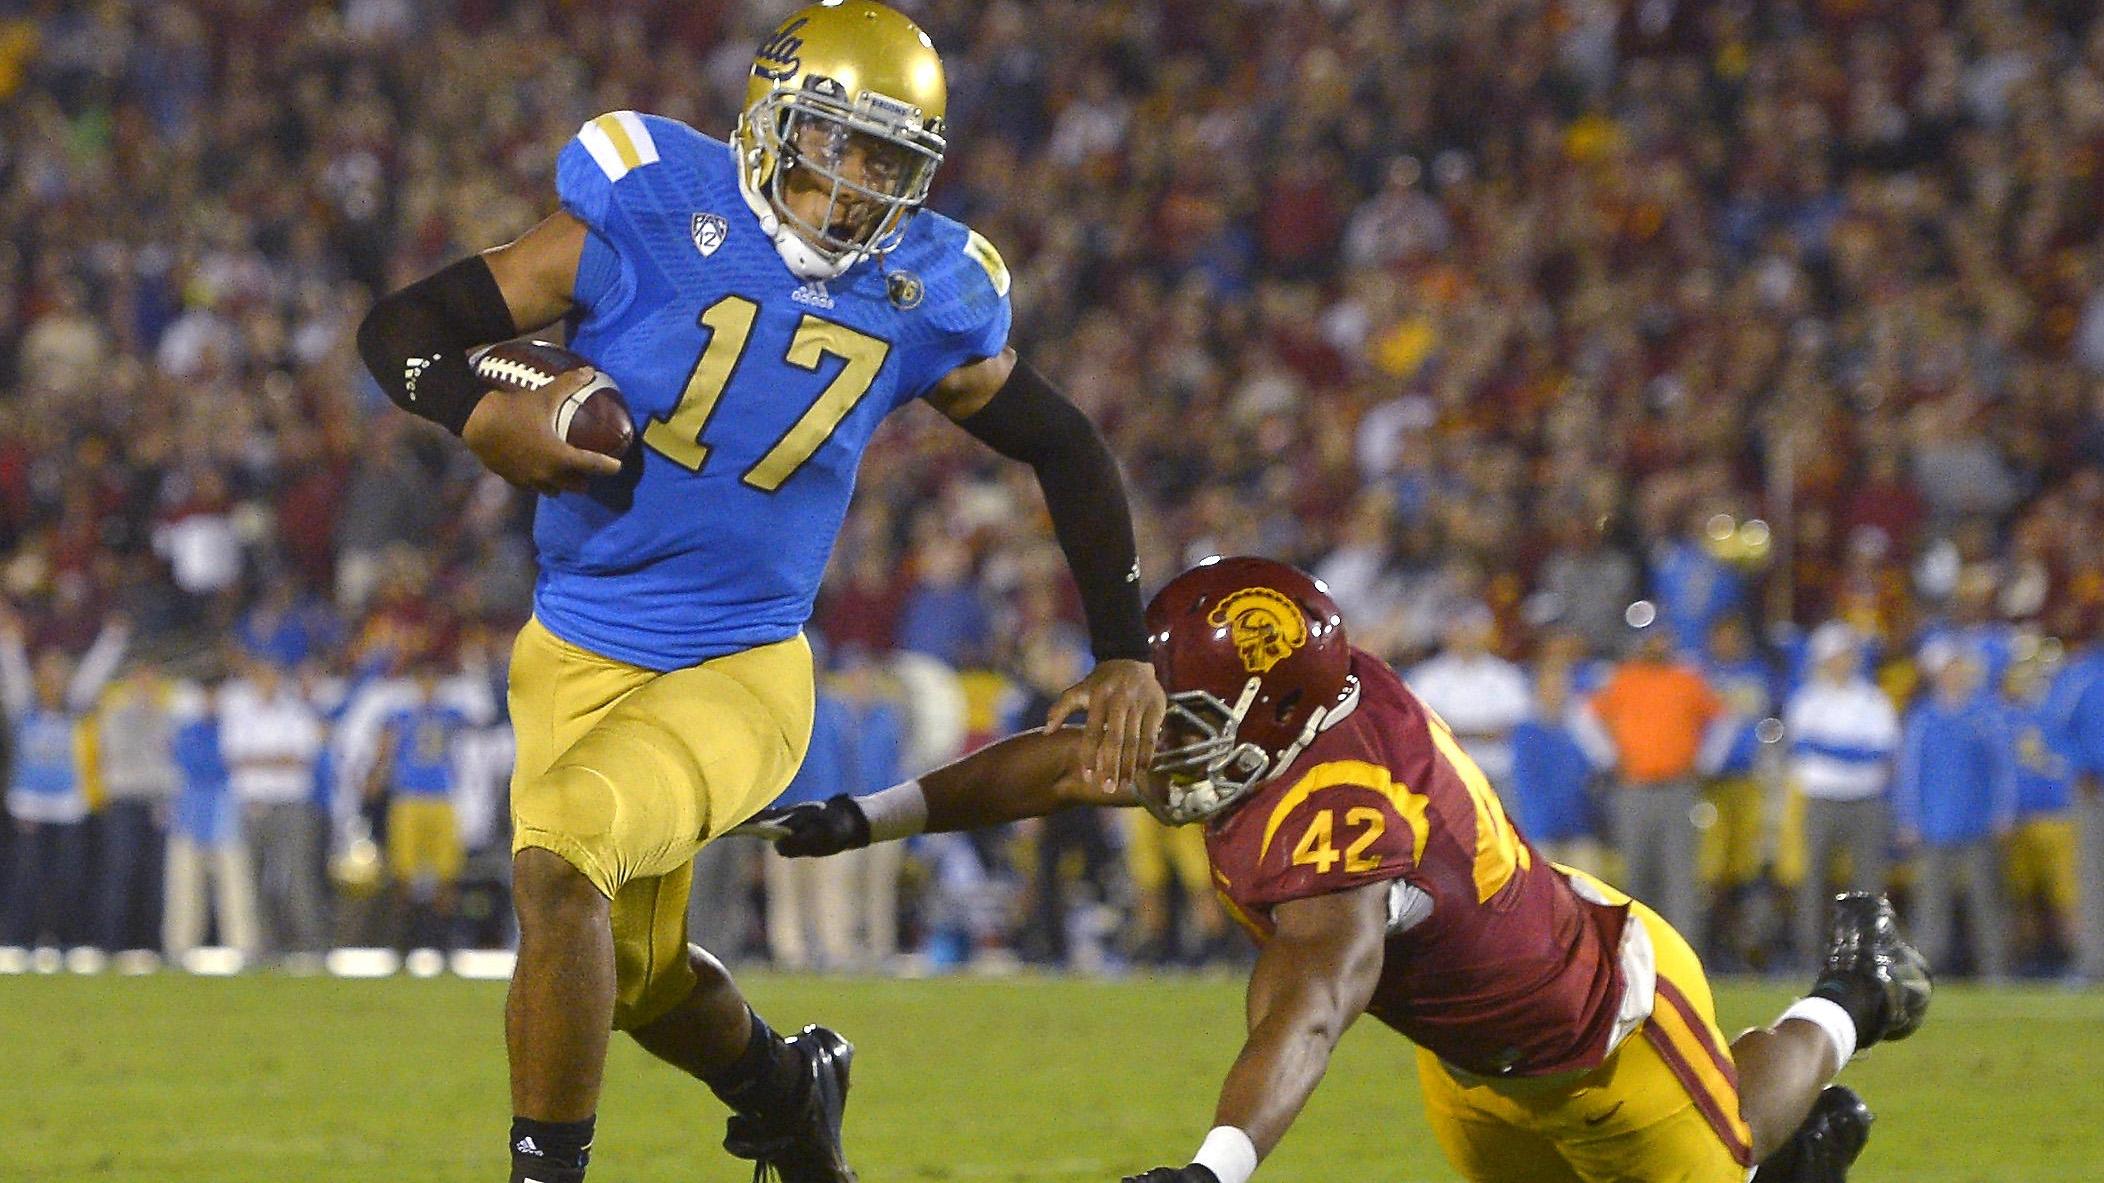 Usc Ucla Football Game 2012 Tickets Free Download Programs - Ucla Football 2013 , HD Wallpaper & Backgrounds